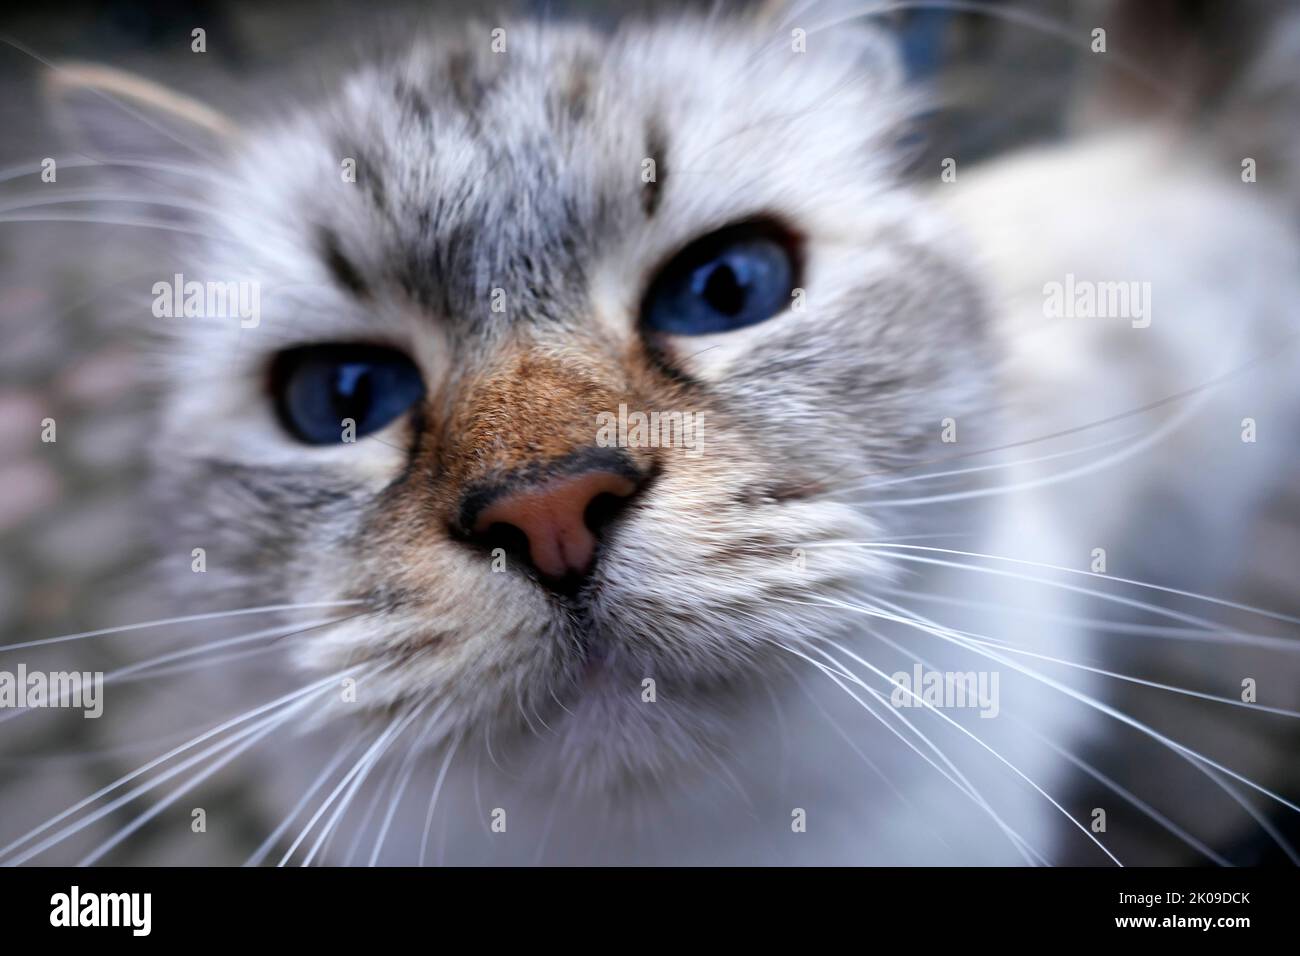 The eyes of a curious ragdoll cat. This is a breed with a distinct color-point coat and blue eyes. Stock Photo